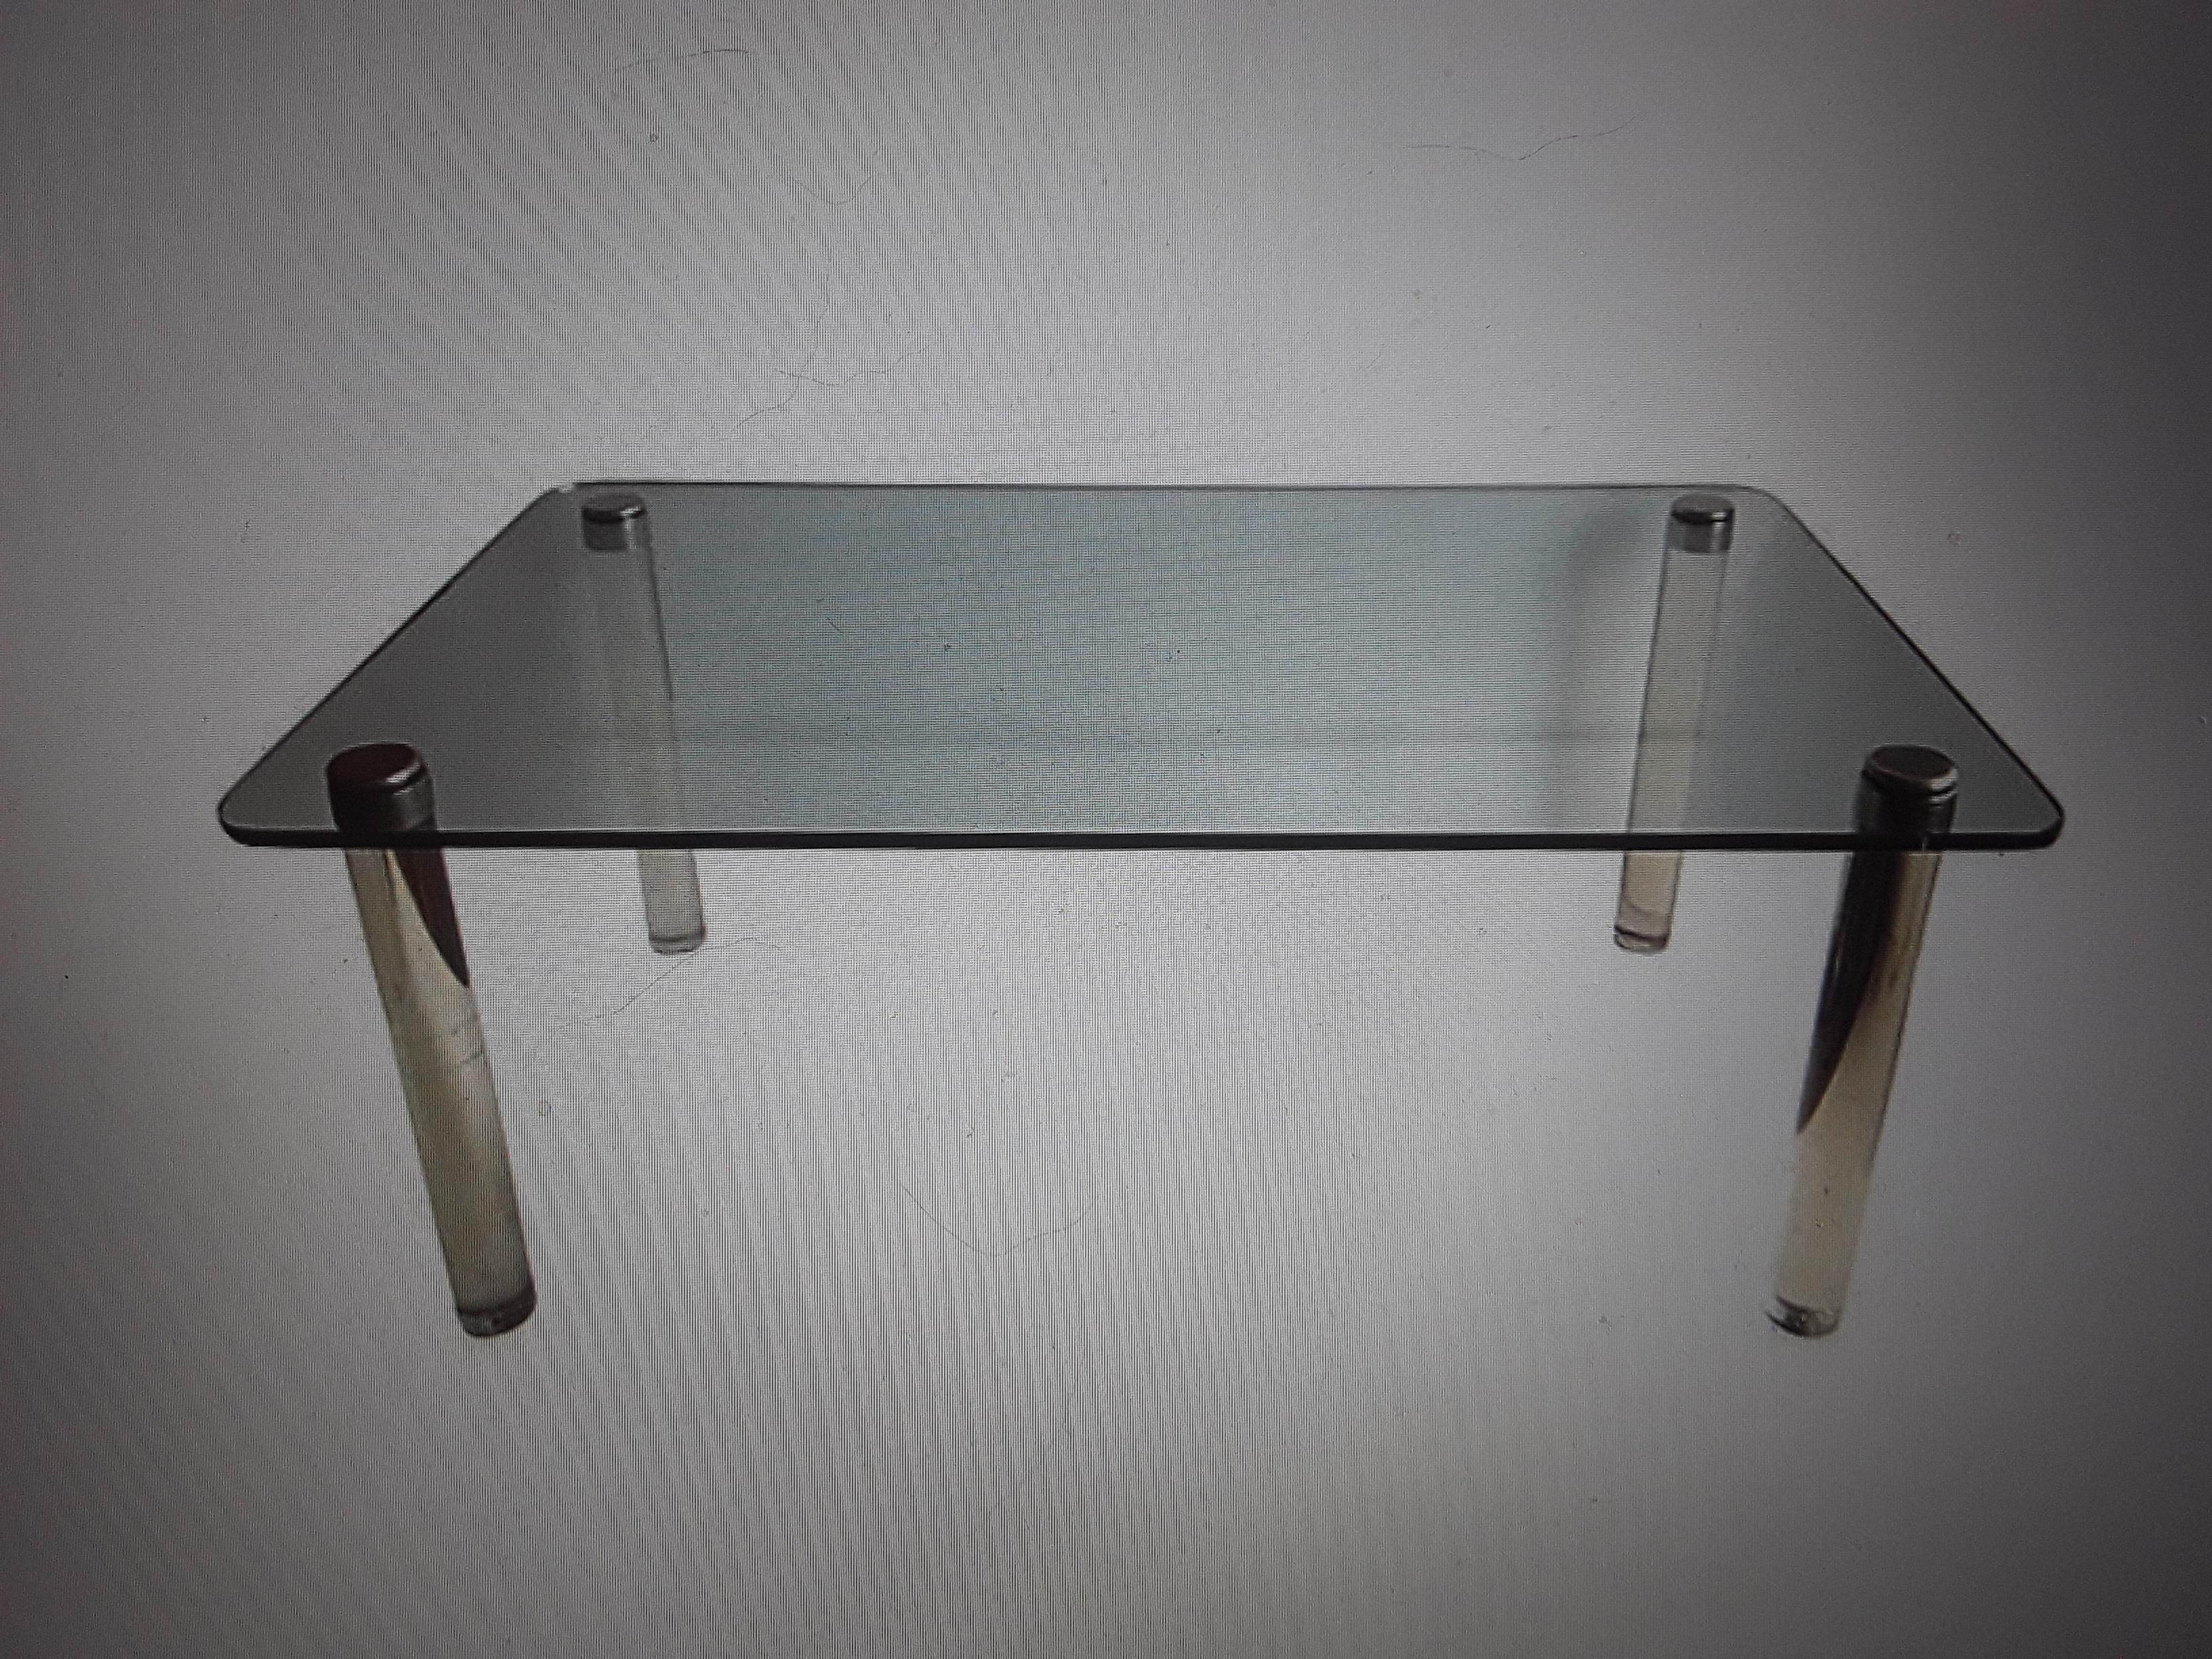 1960's Mid Century Modern Lucite and Glass Dining Table. Glass top with heavy lucite leg posts topped with chrome caps.